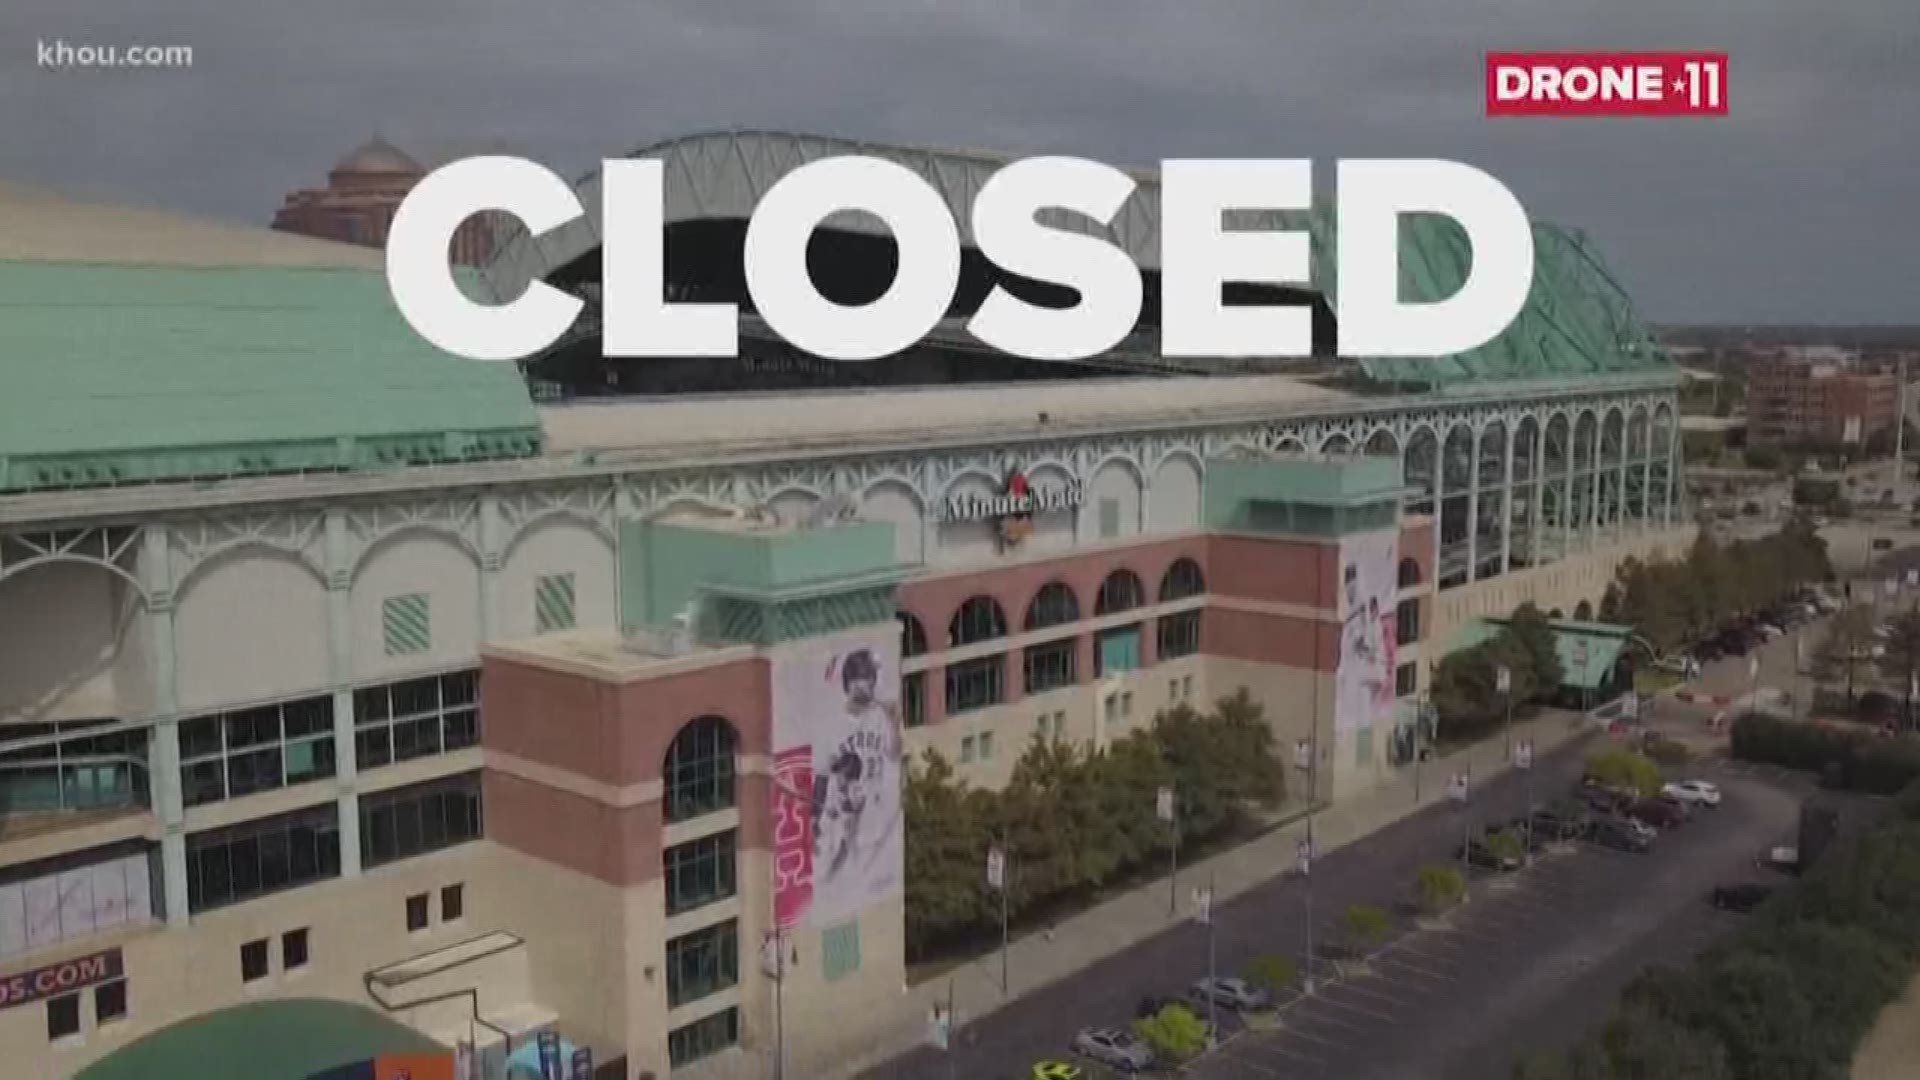 It's a beautiful day in Houston, so why will the roof at Minute Maid be closed for tonight's World Series game? Daniel Gotera explains.